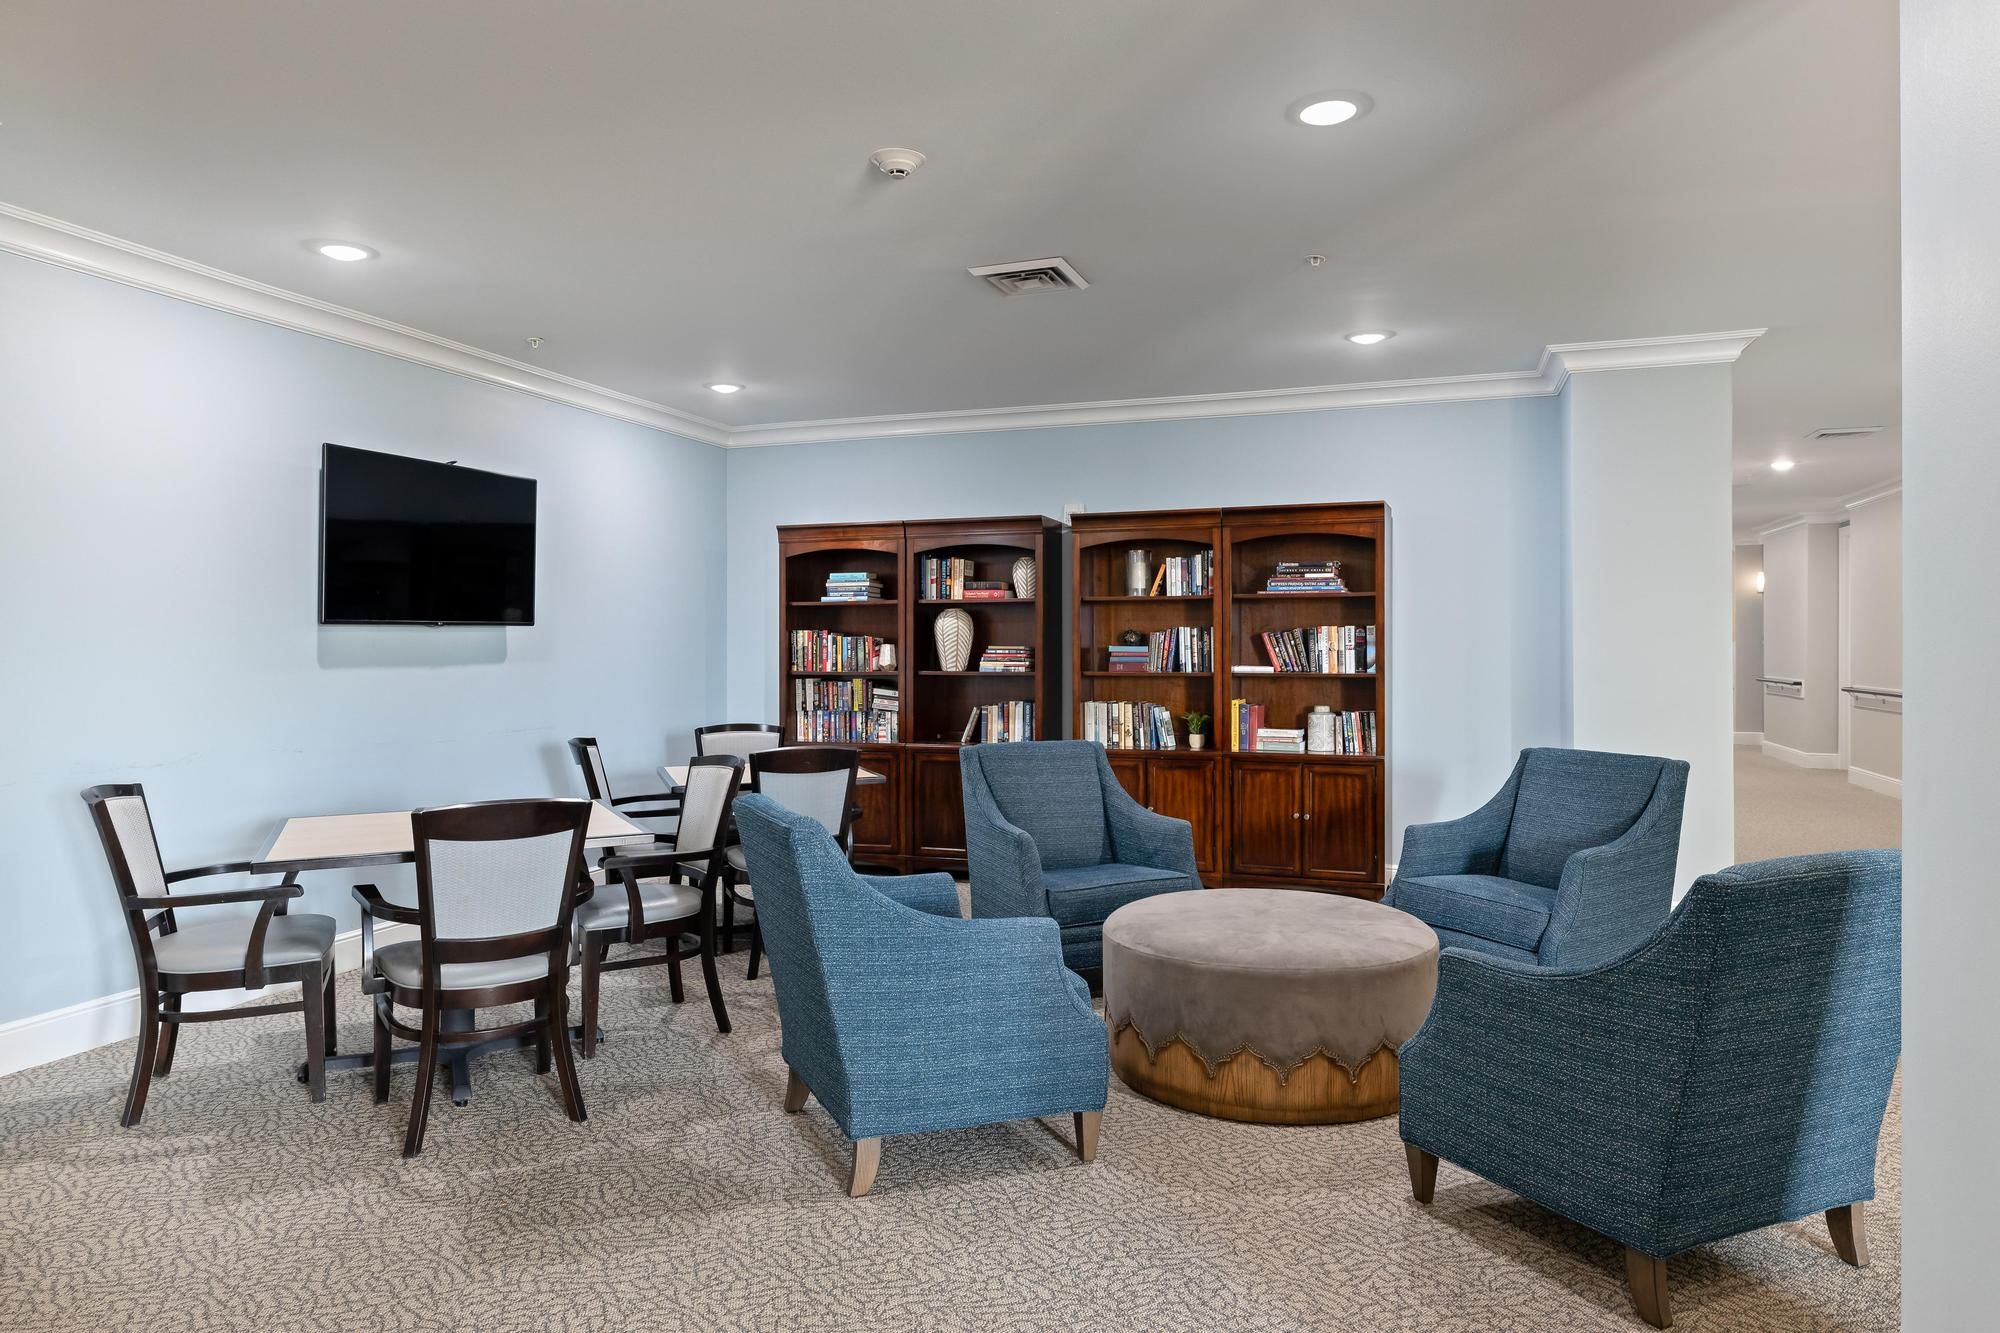 The Claiborne at Baton Rouge senior community library with books and comfortable chairs